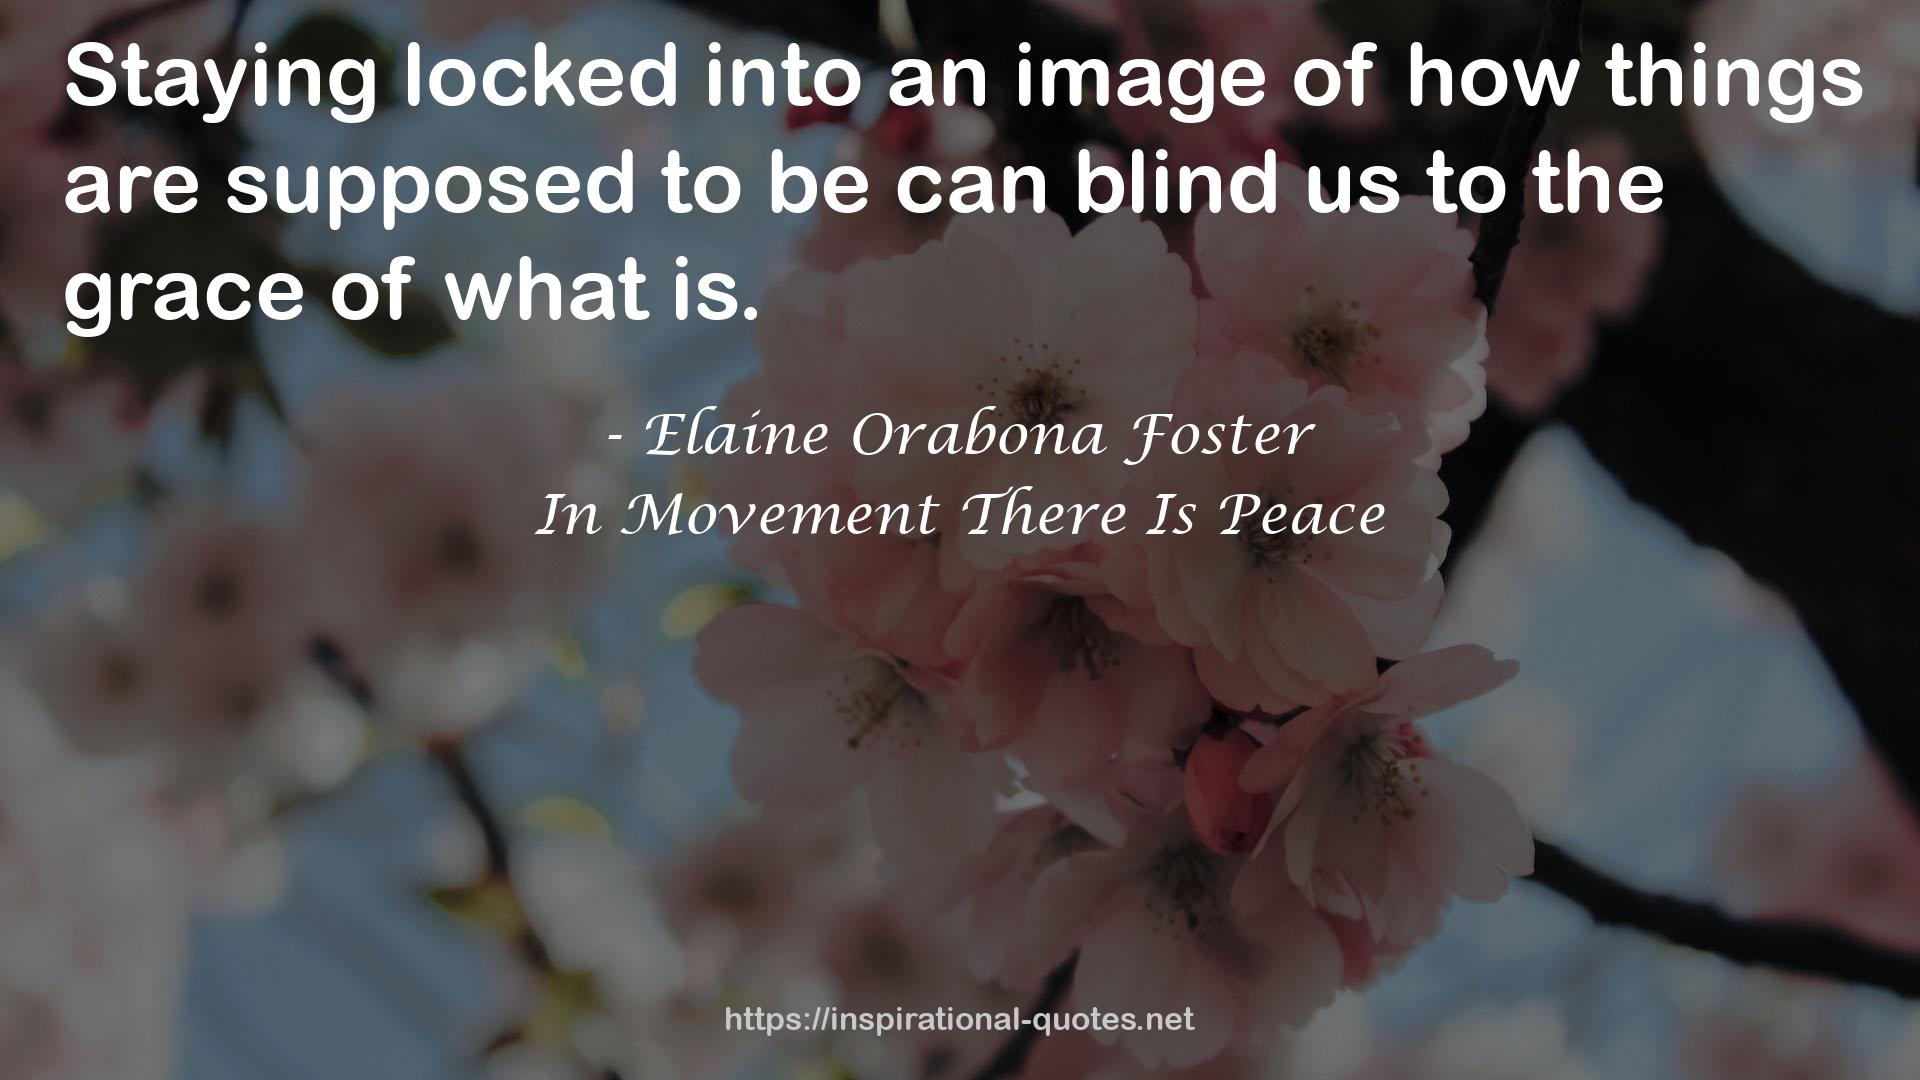 In Movement There Is Peace QUOTES